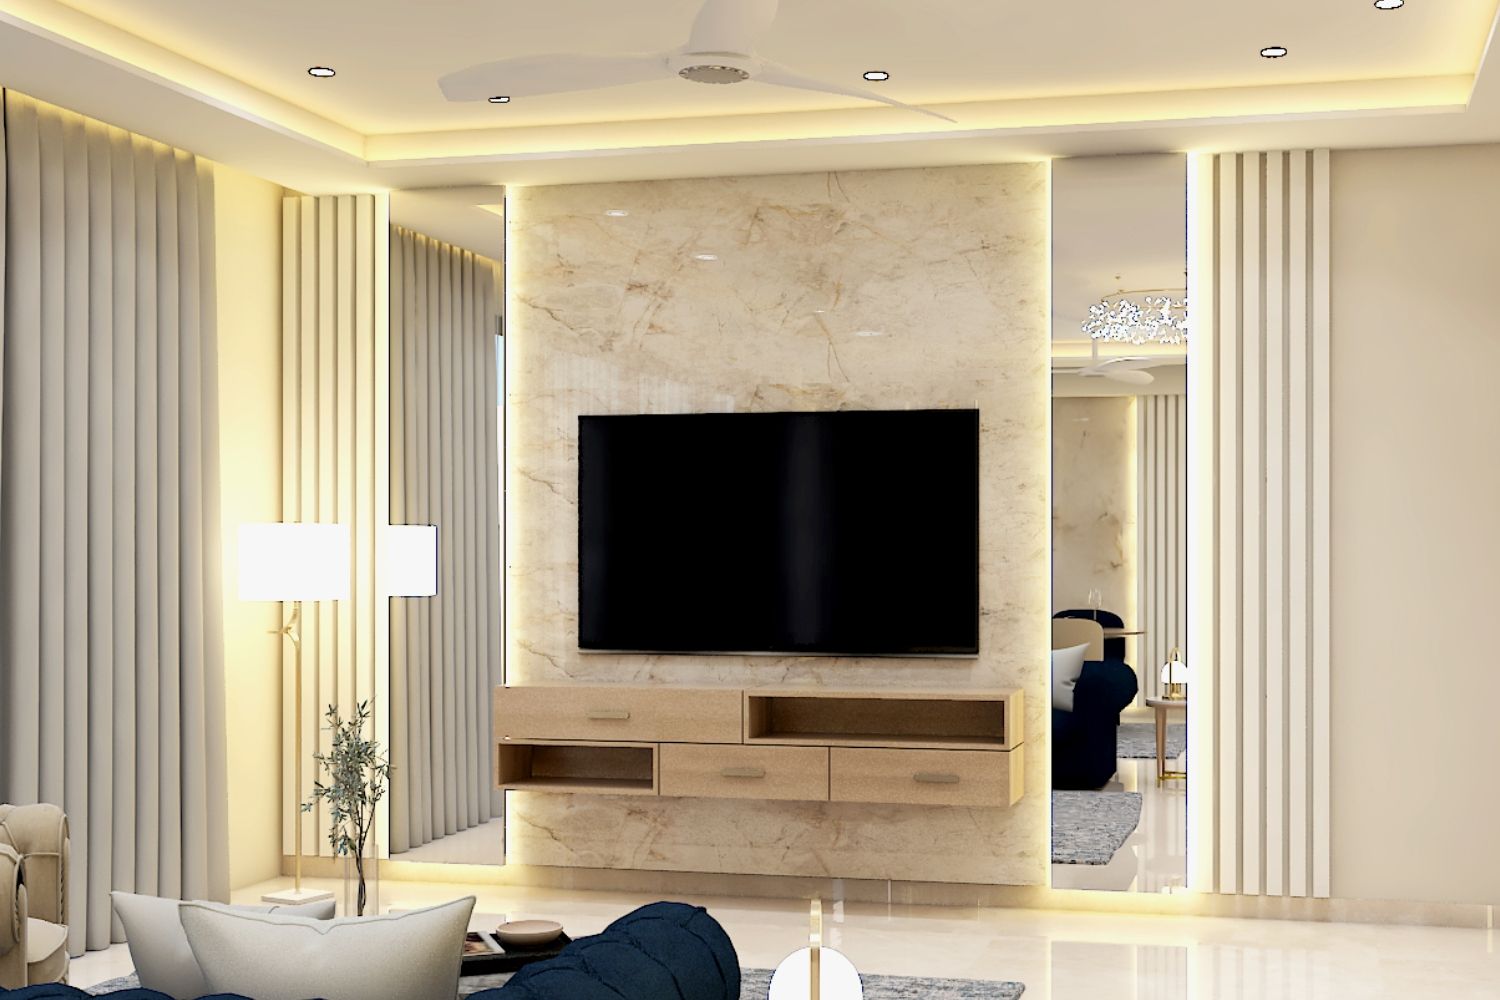 Contemporary Wall-Mounted TV Unit Design With Cream Marble Panel And Side Mirrors